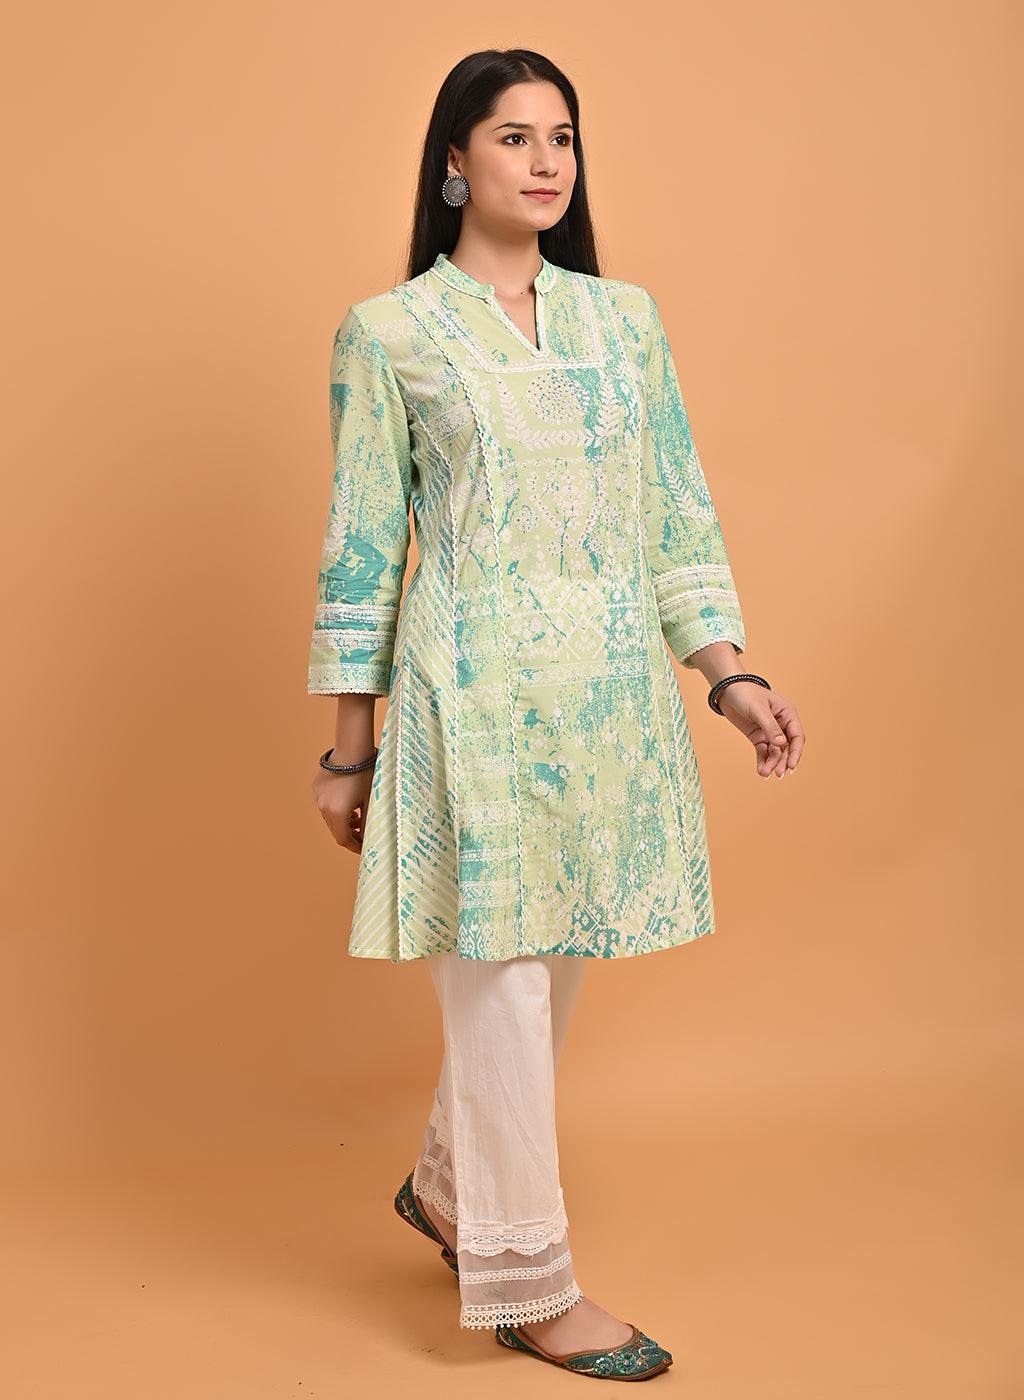 Buy KIPEK Women's Printed Cotton Three-Quarter Sleeves Mandarin Collar Short  Tunic Kurta in Grey Color Latest Kurti Designed for Casual Function wear  Smooth in Any Occasions with Size S at Amazon.in